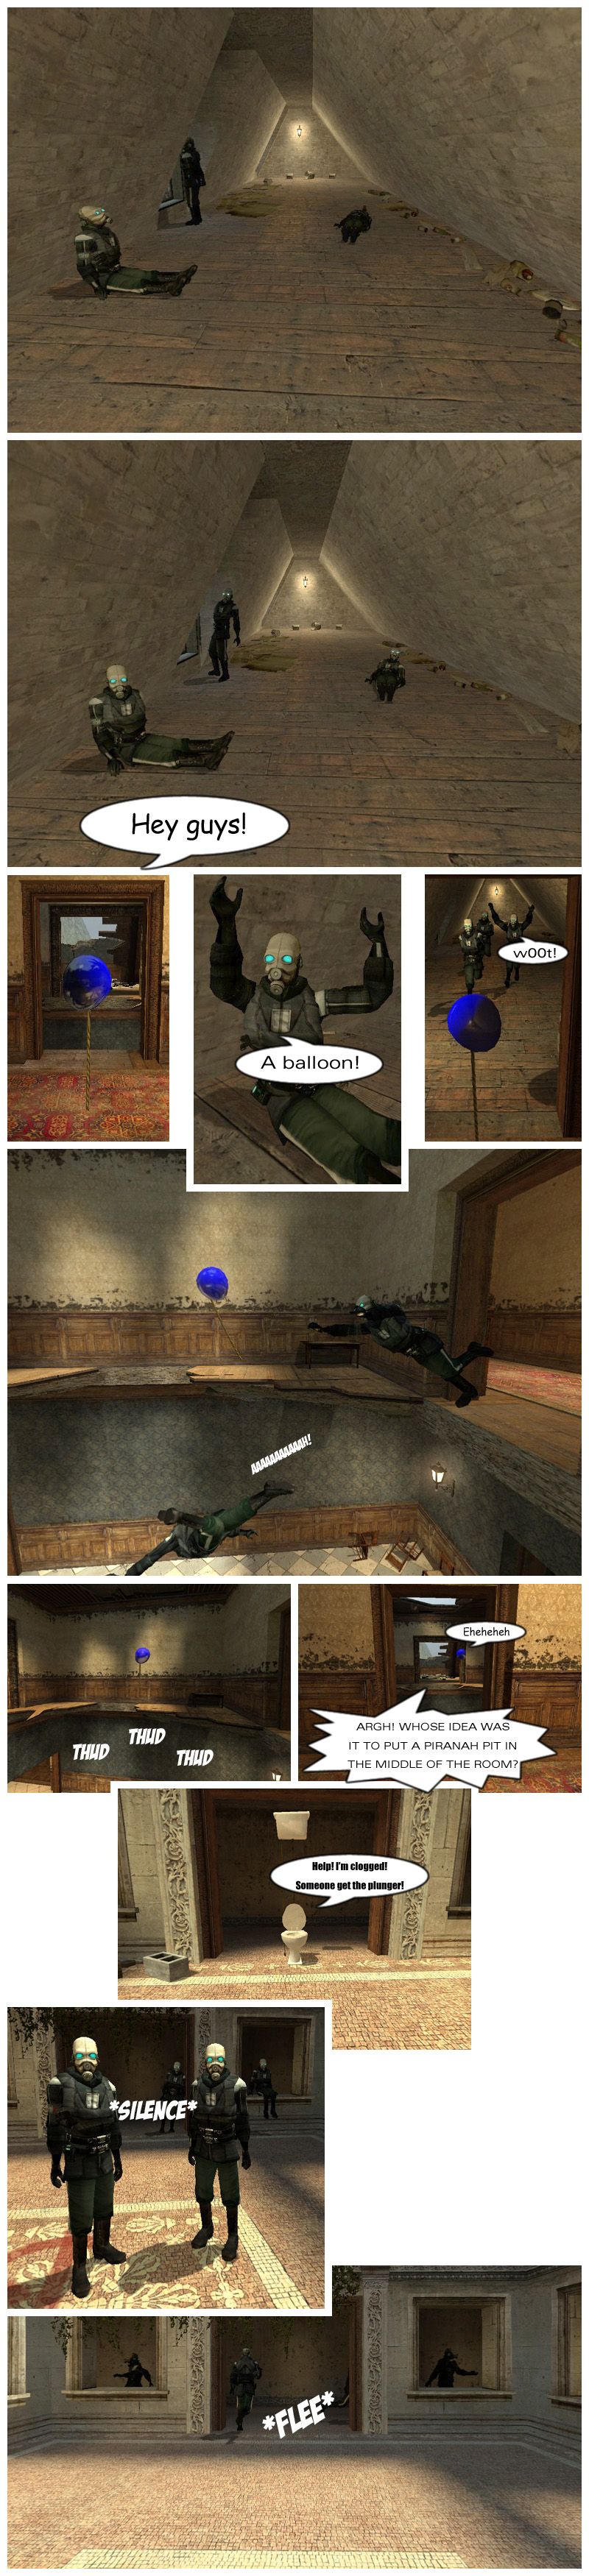 Three terrorists are chilling in the attic when someone says hey, guys, calling their attention. Agent Balloon then floats up a hole and into their line of sight. One of the terrorists exclaims a balloon and the three happily chase after it. They all leap towards it and miss, falling down into the ground a level below. Agent Balloon laughs to itself as one of the terrorists screams in pain and asks whose idea was it to put a piranha pit in the middle of the room. Meanwhile, Agent Toilet walks up to a group of terrorists and screams for help, saying it is clogged and for someone to get the plunger. The terrorists stare in silence for a moment, then flee.